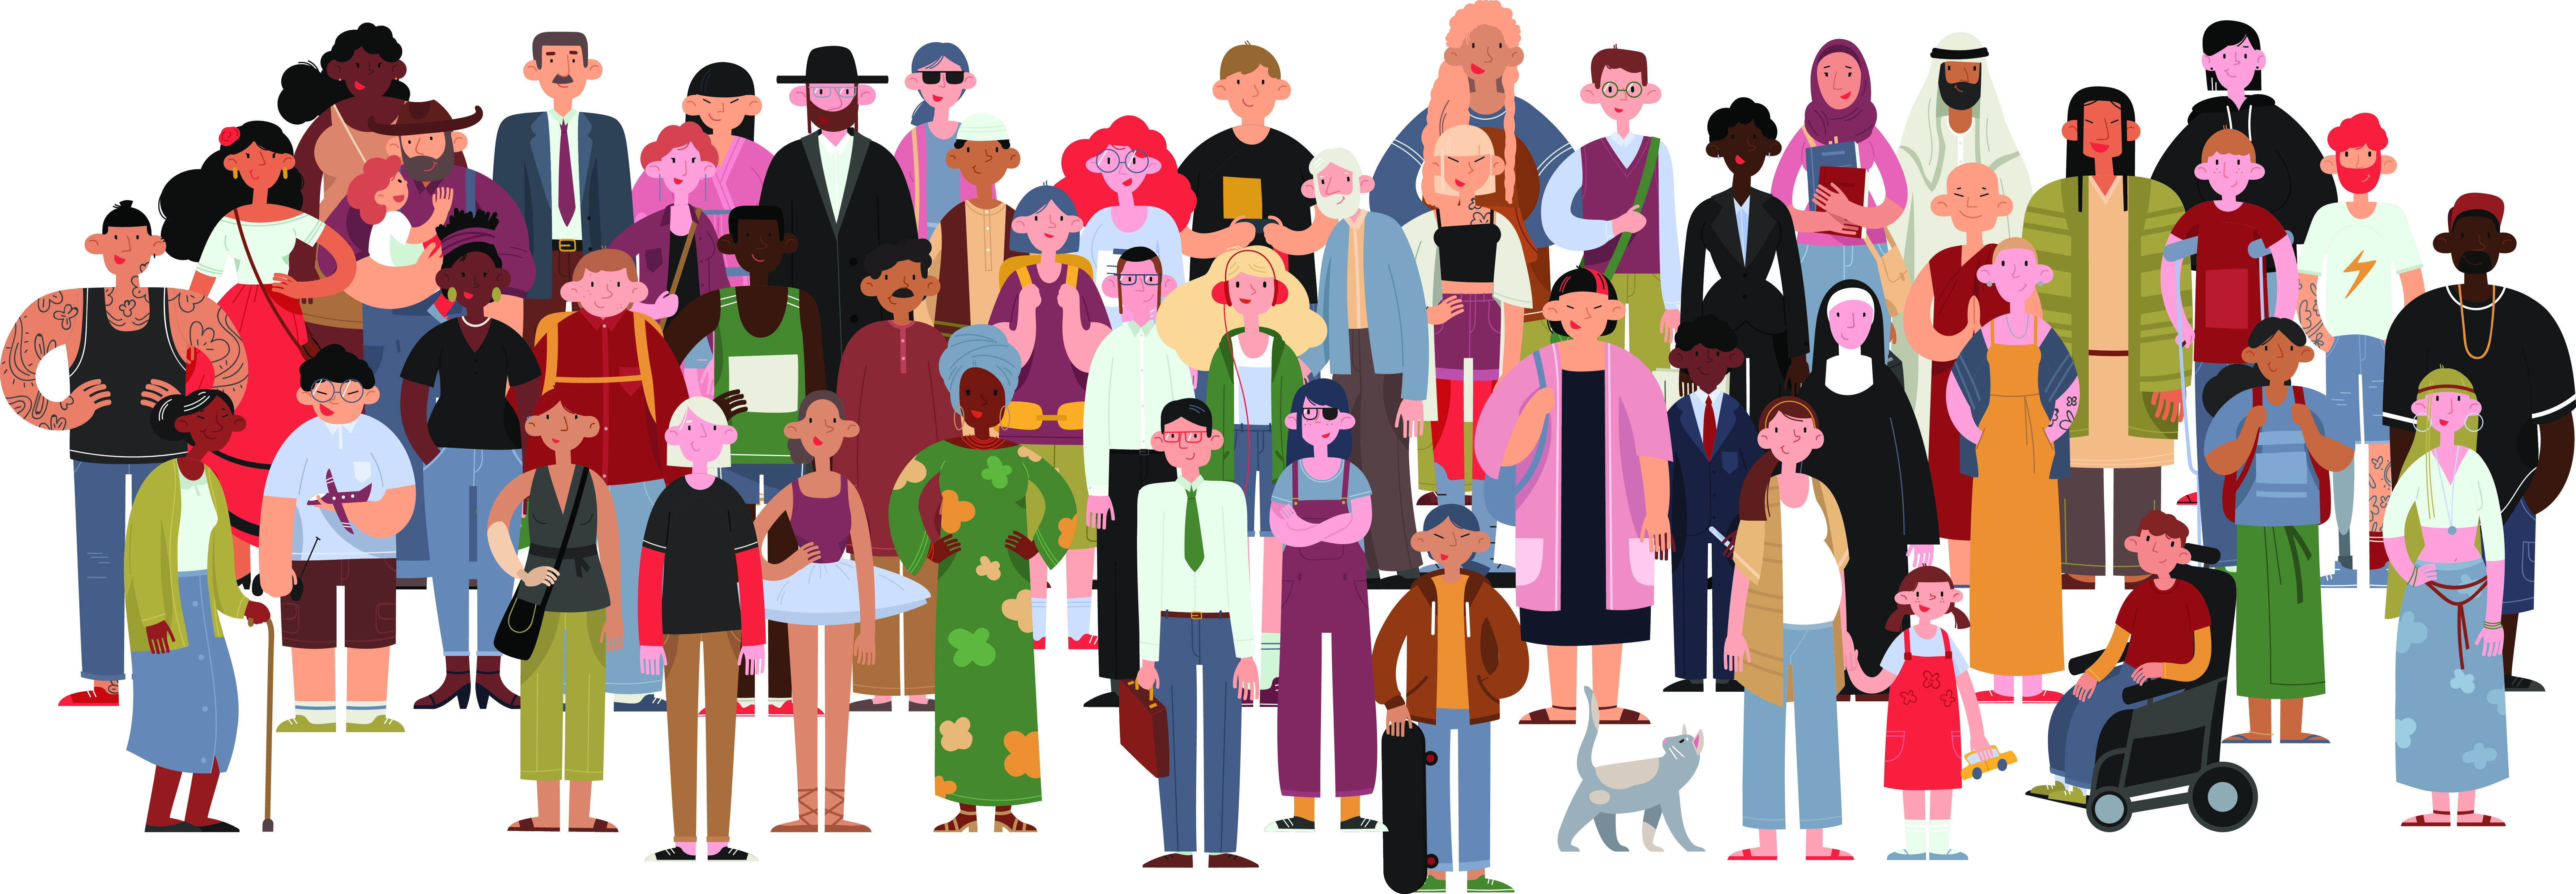 Illustration of a diverse crowd of people.